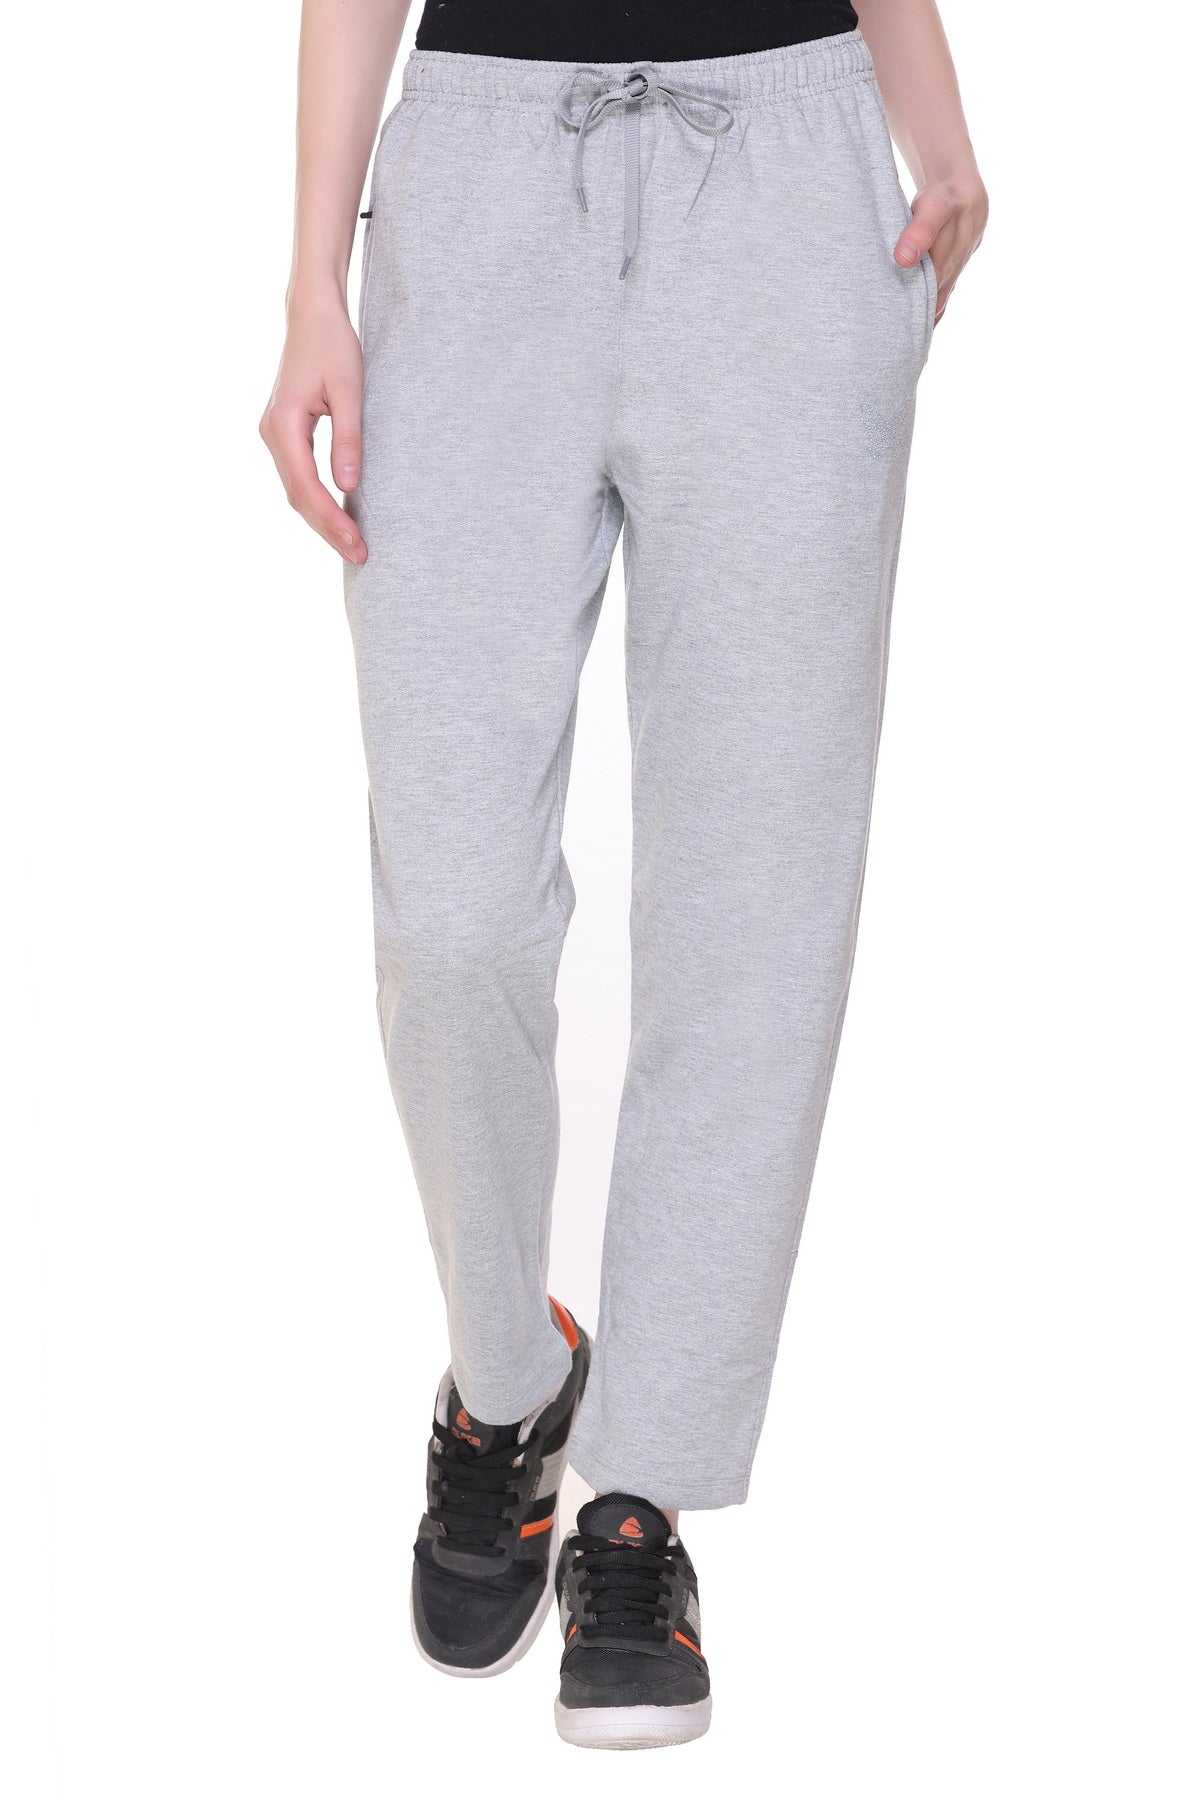 Buy Winter Cotton Fleece Printed Track pants for Women In Plus Size online  at best Prices by Cupidclothings – Cupid Clothings